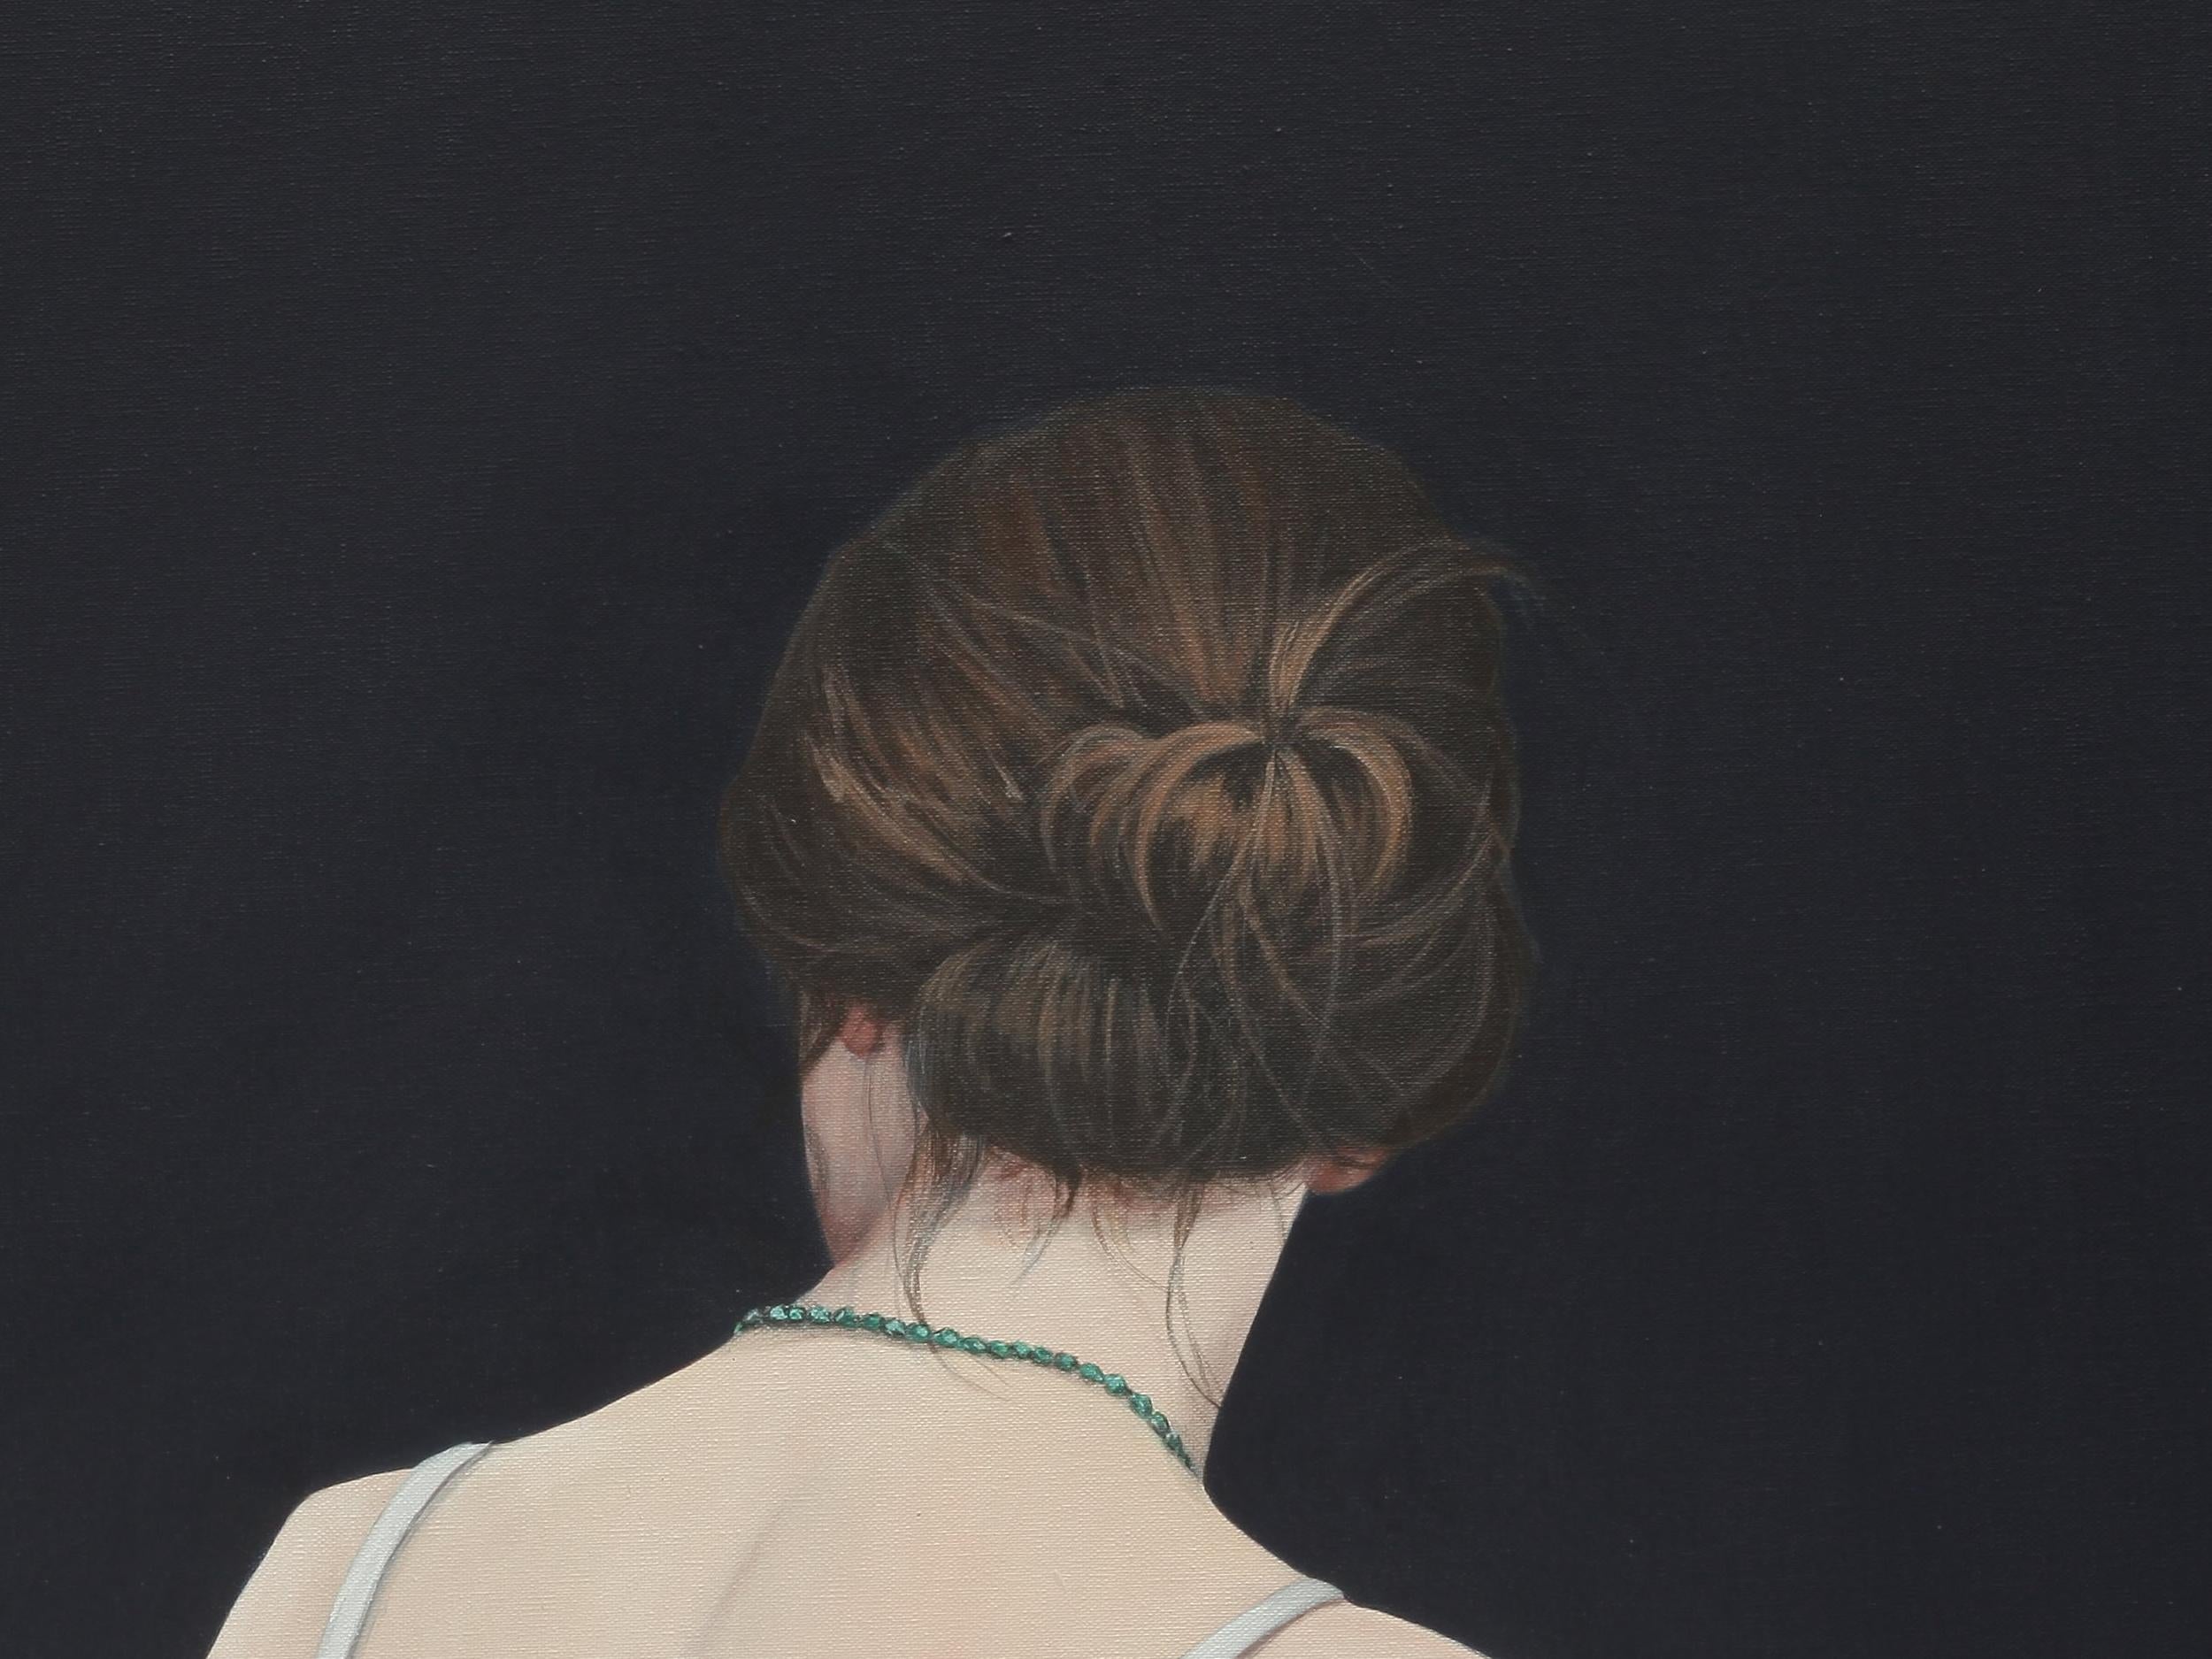 Contemporary Portrait of a Girl with Bun and White Top on Black Background - Painting by Karoline Kroiss